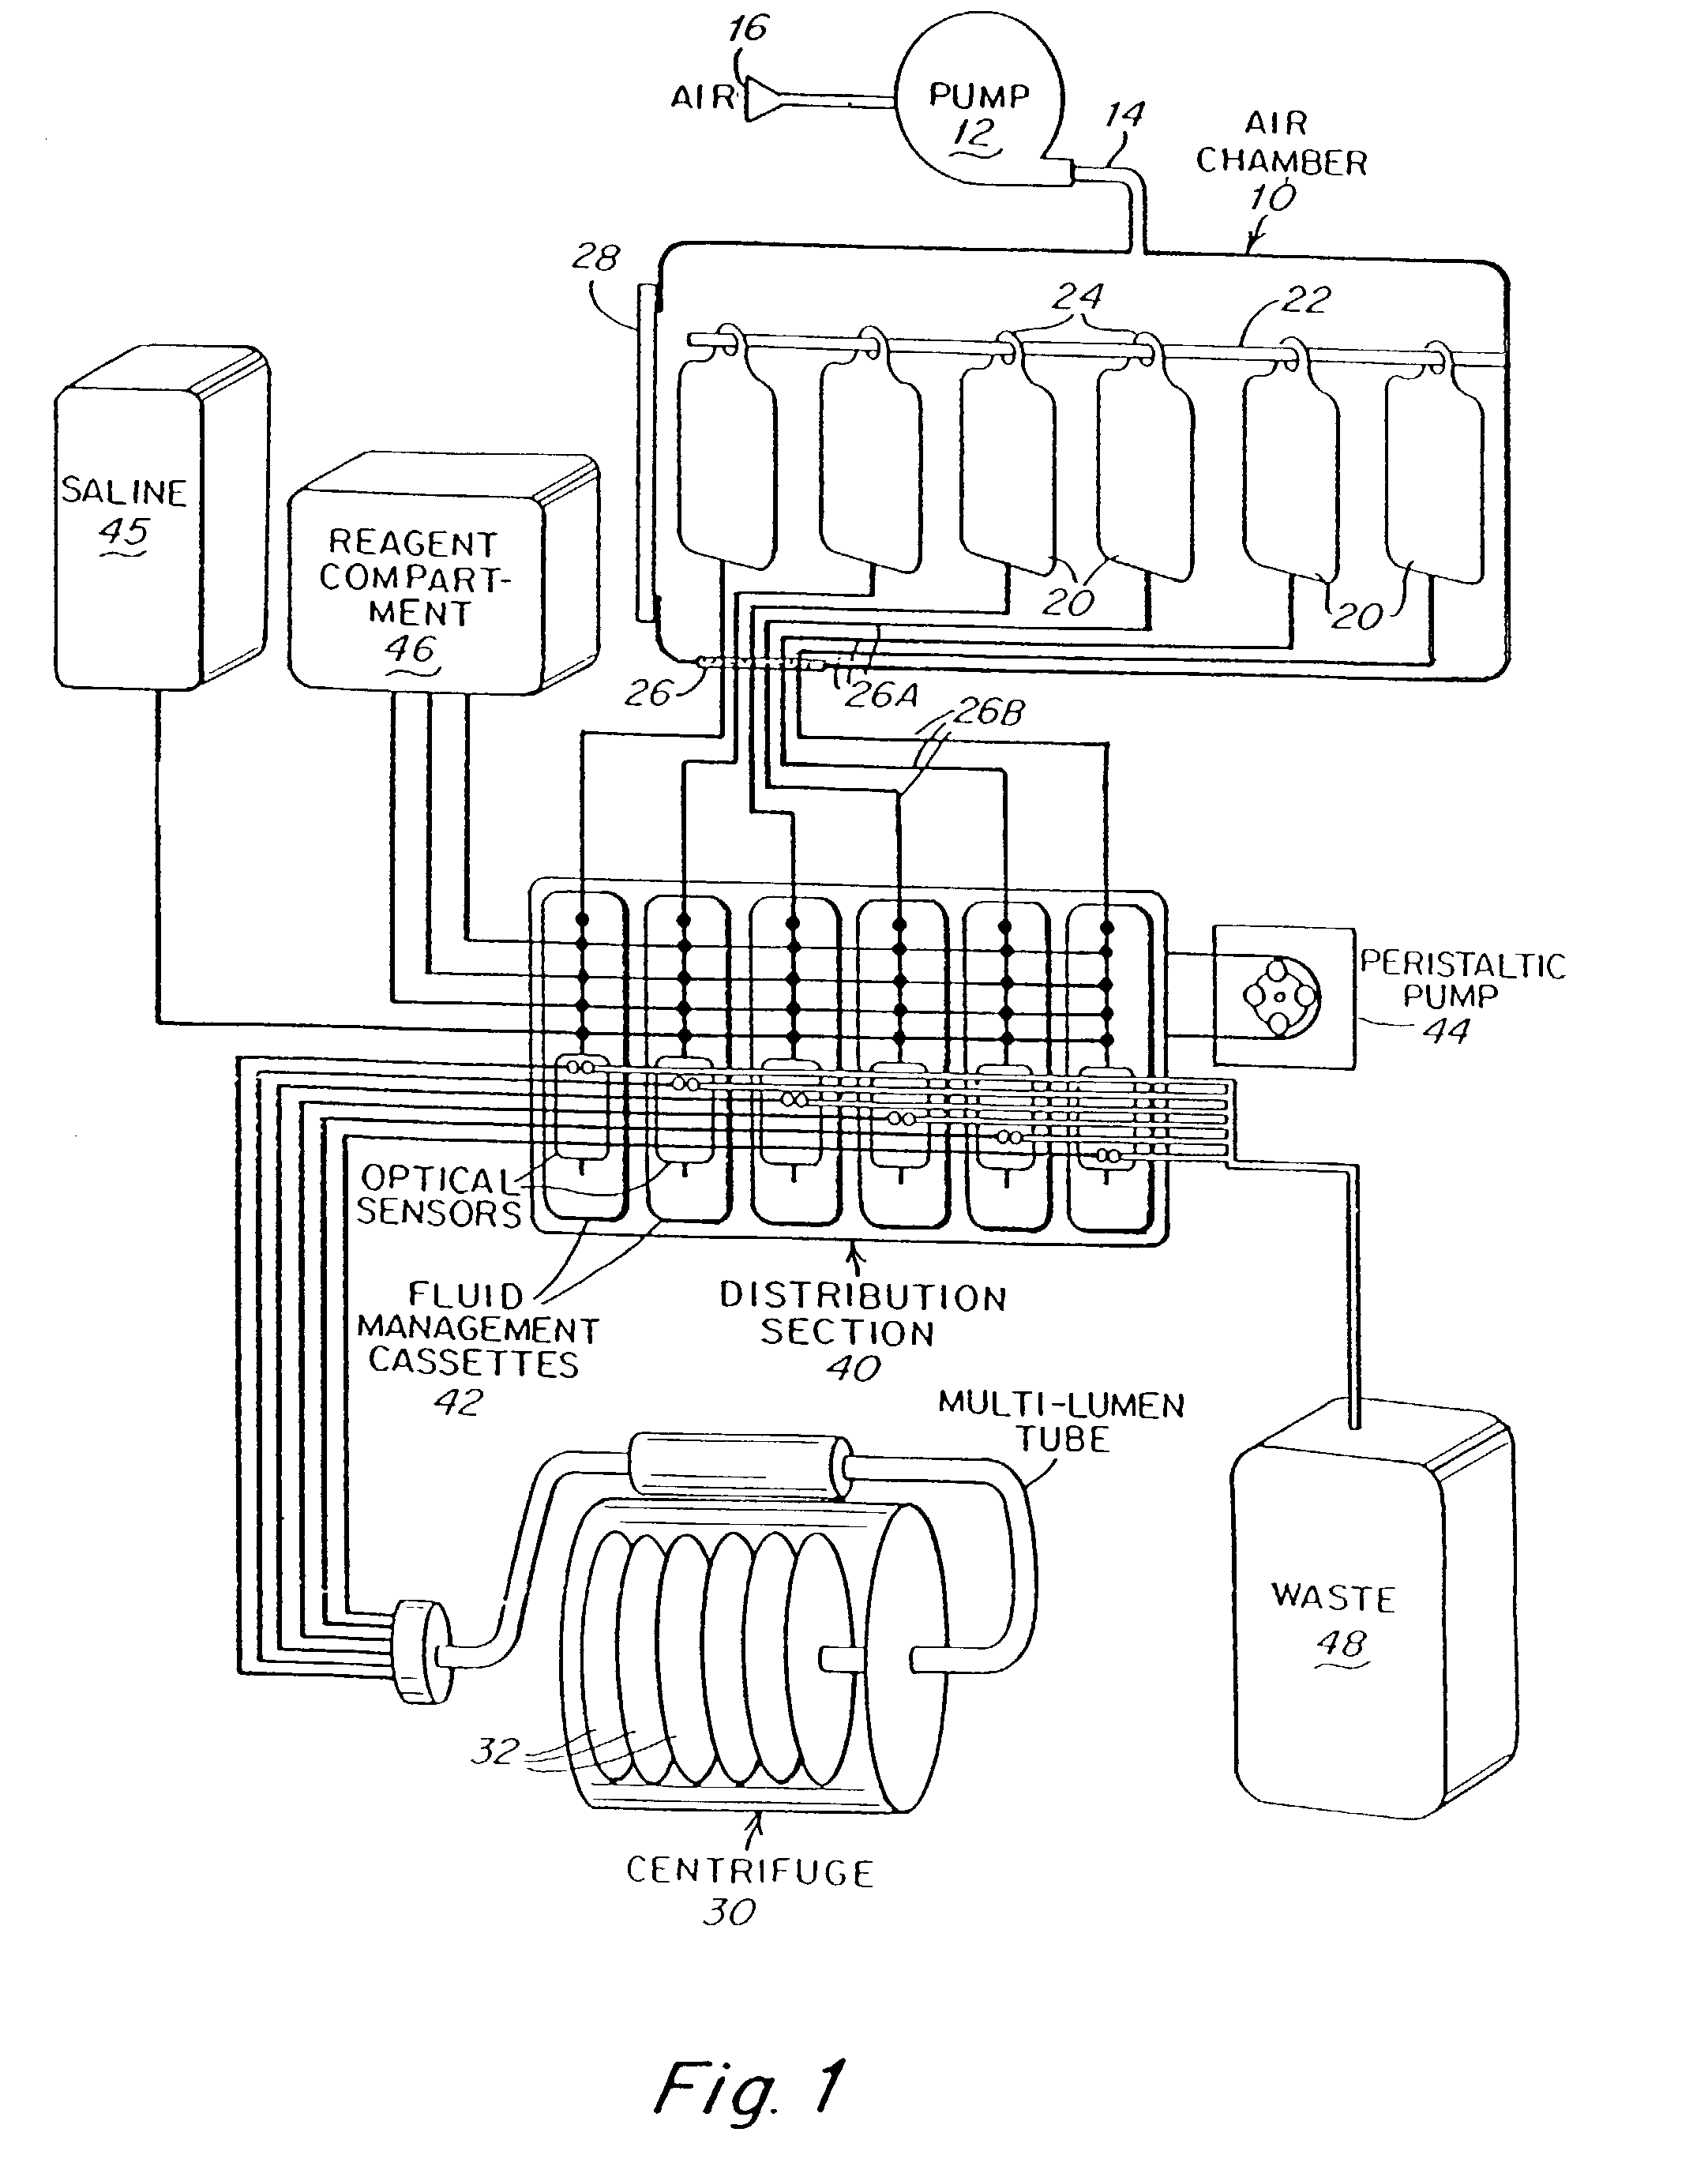 Blood product transfer system